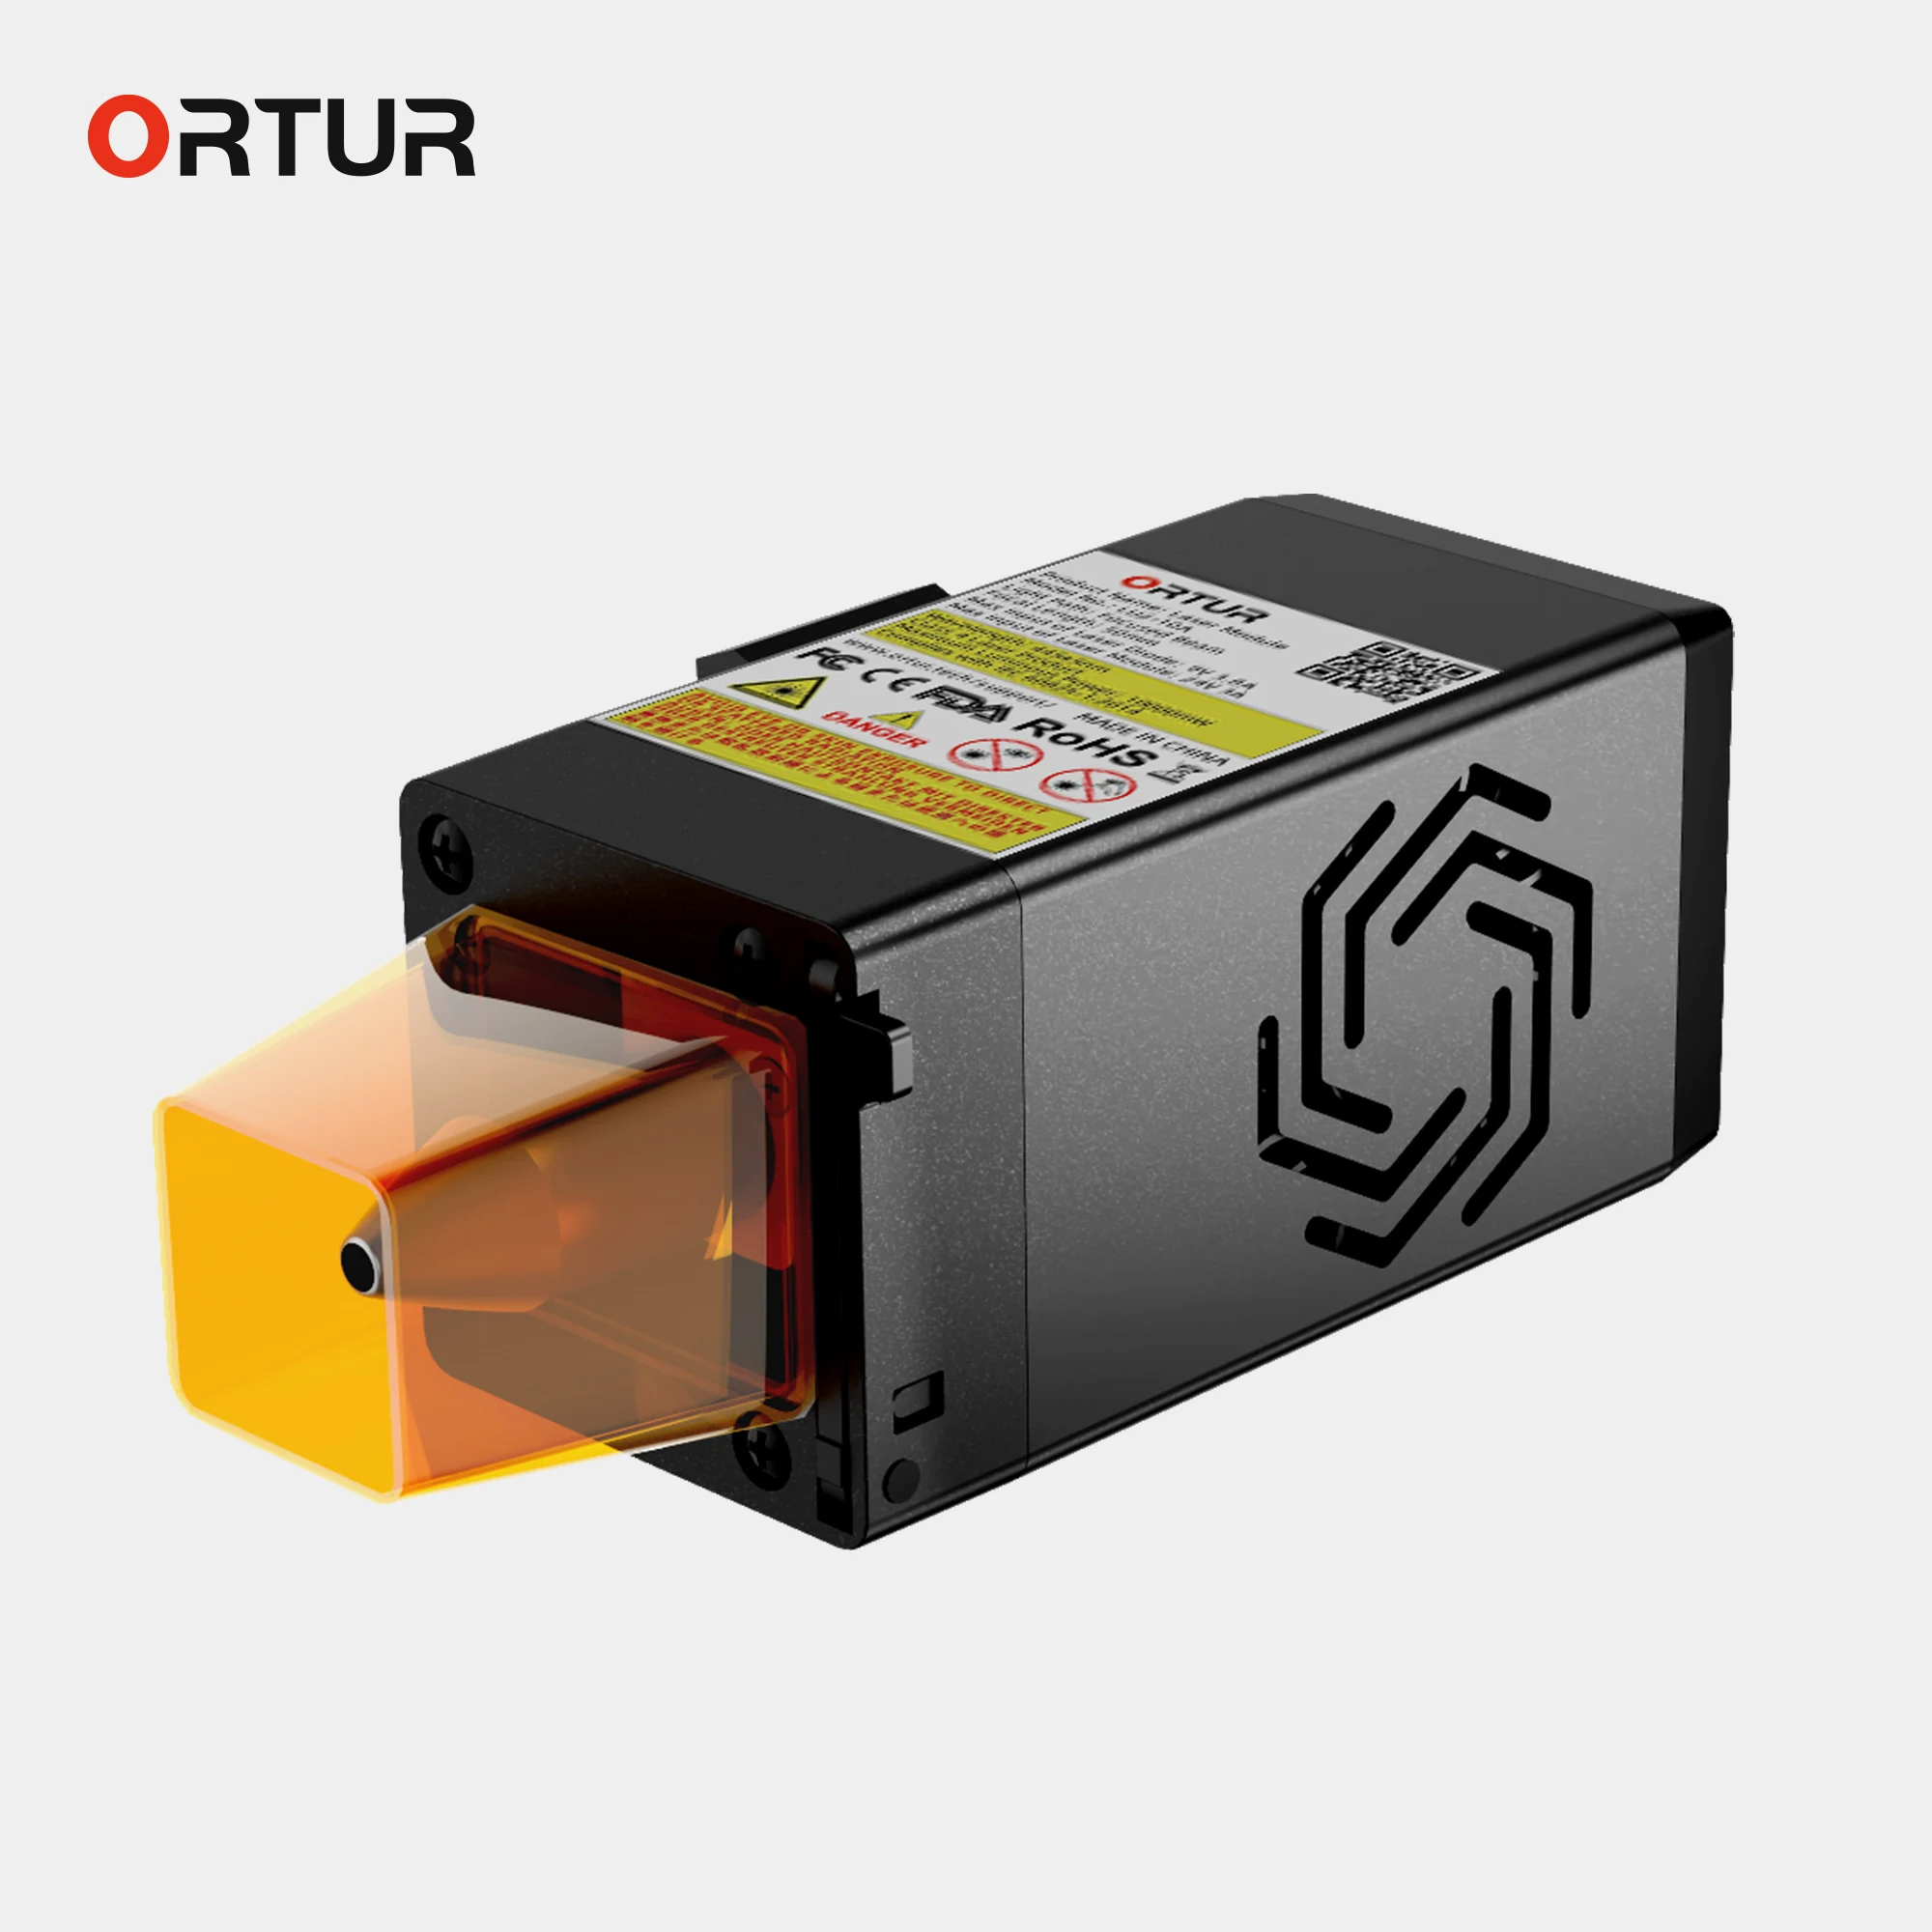 

ORTUR LU2-10A 10W Engraving Laser Module Air Assist Double Ultra-Fine Compressed Spot for Wood Acrylic Cutting 30mm Fixed Focus